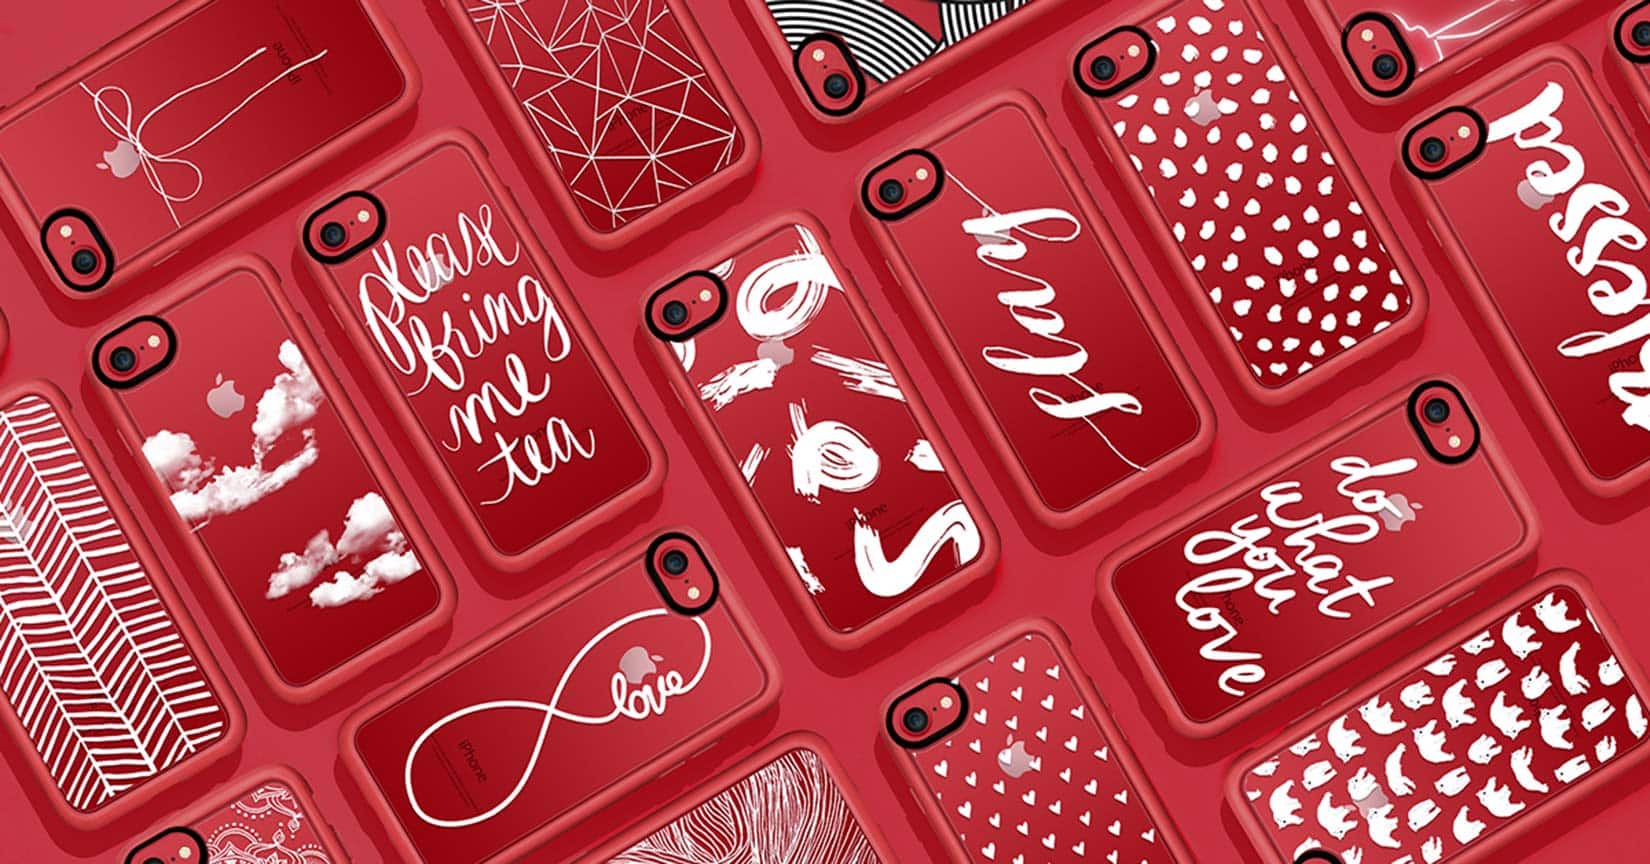 Casetify offers elegant and quirky designs for a clear iPhone case to bring out the red on the new PRODUCT(RED) iPhone 7 and 7 Plus.